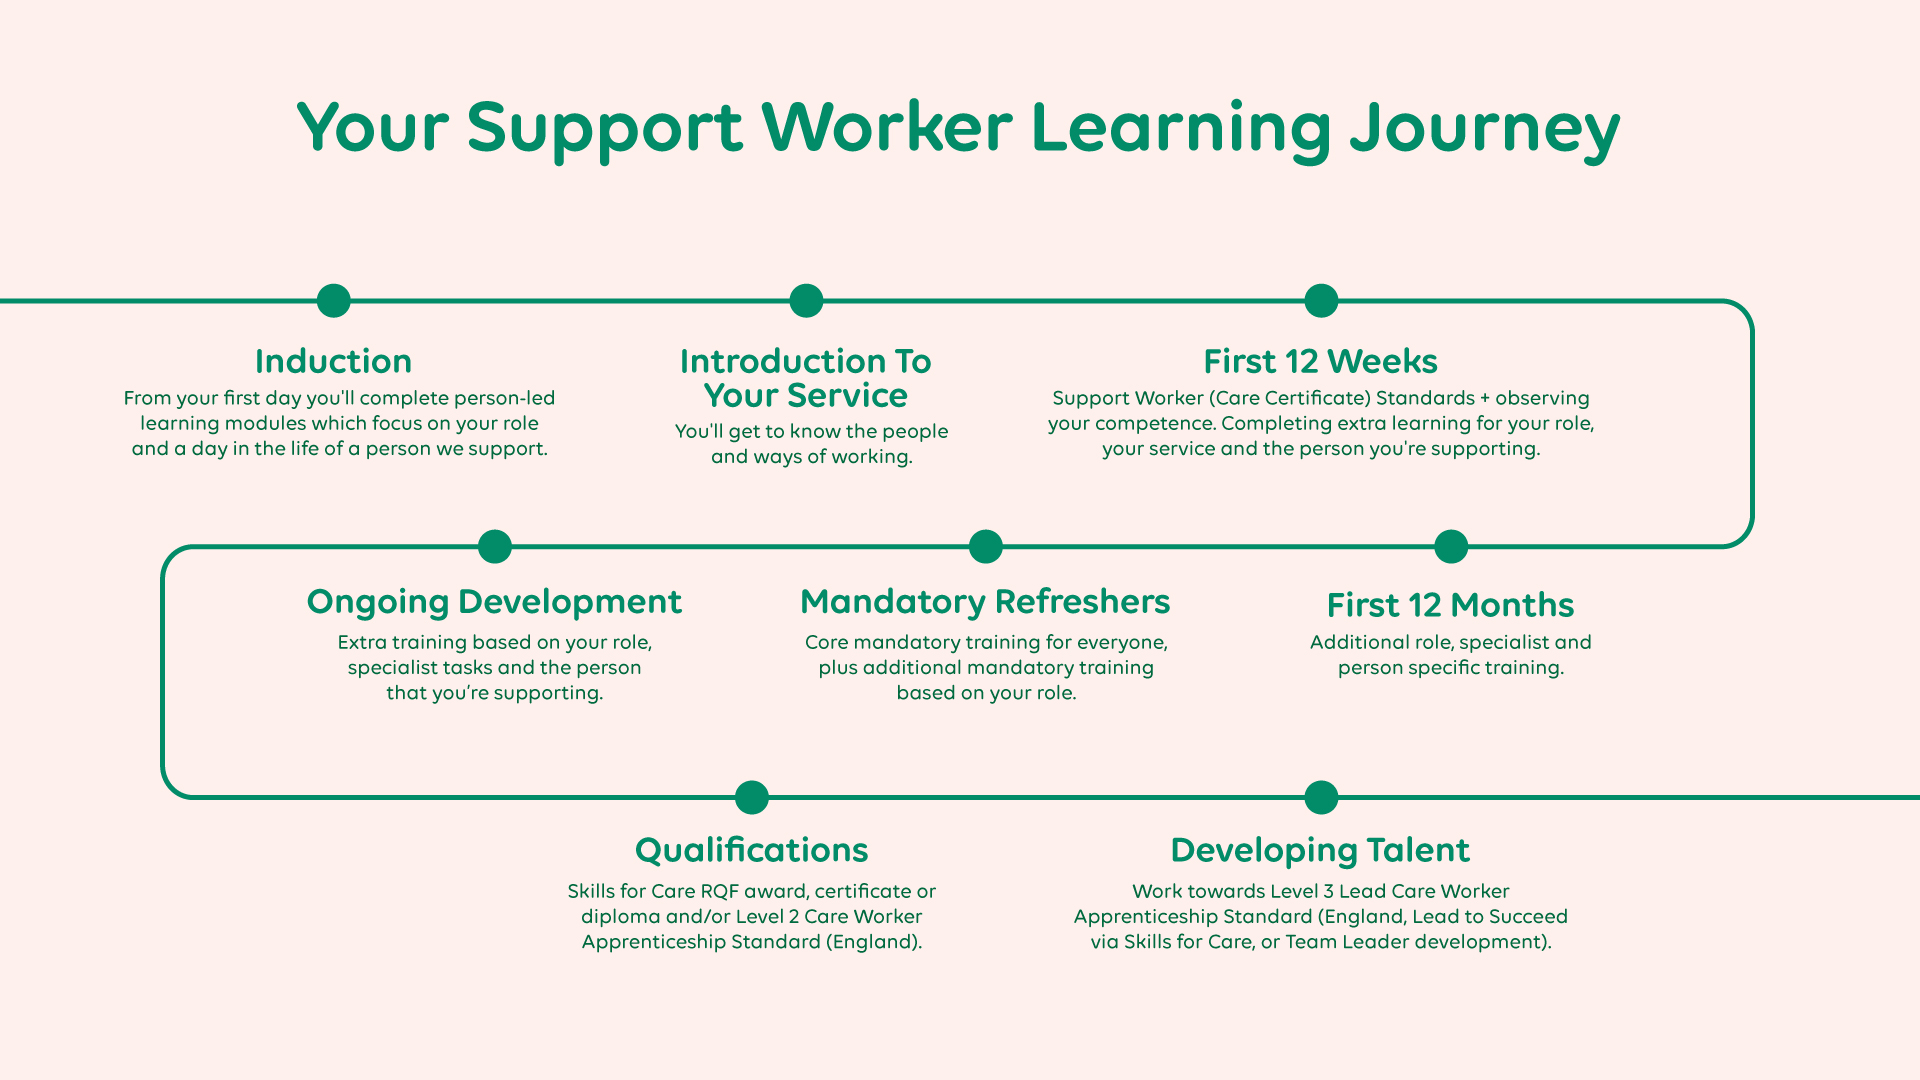 Support worker learning journey infographic